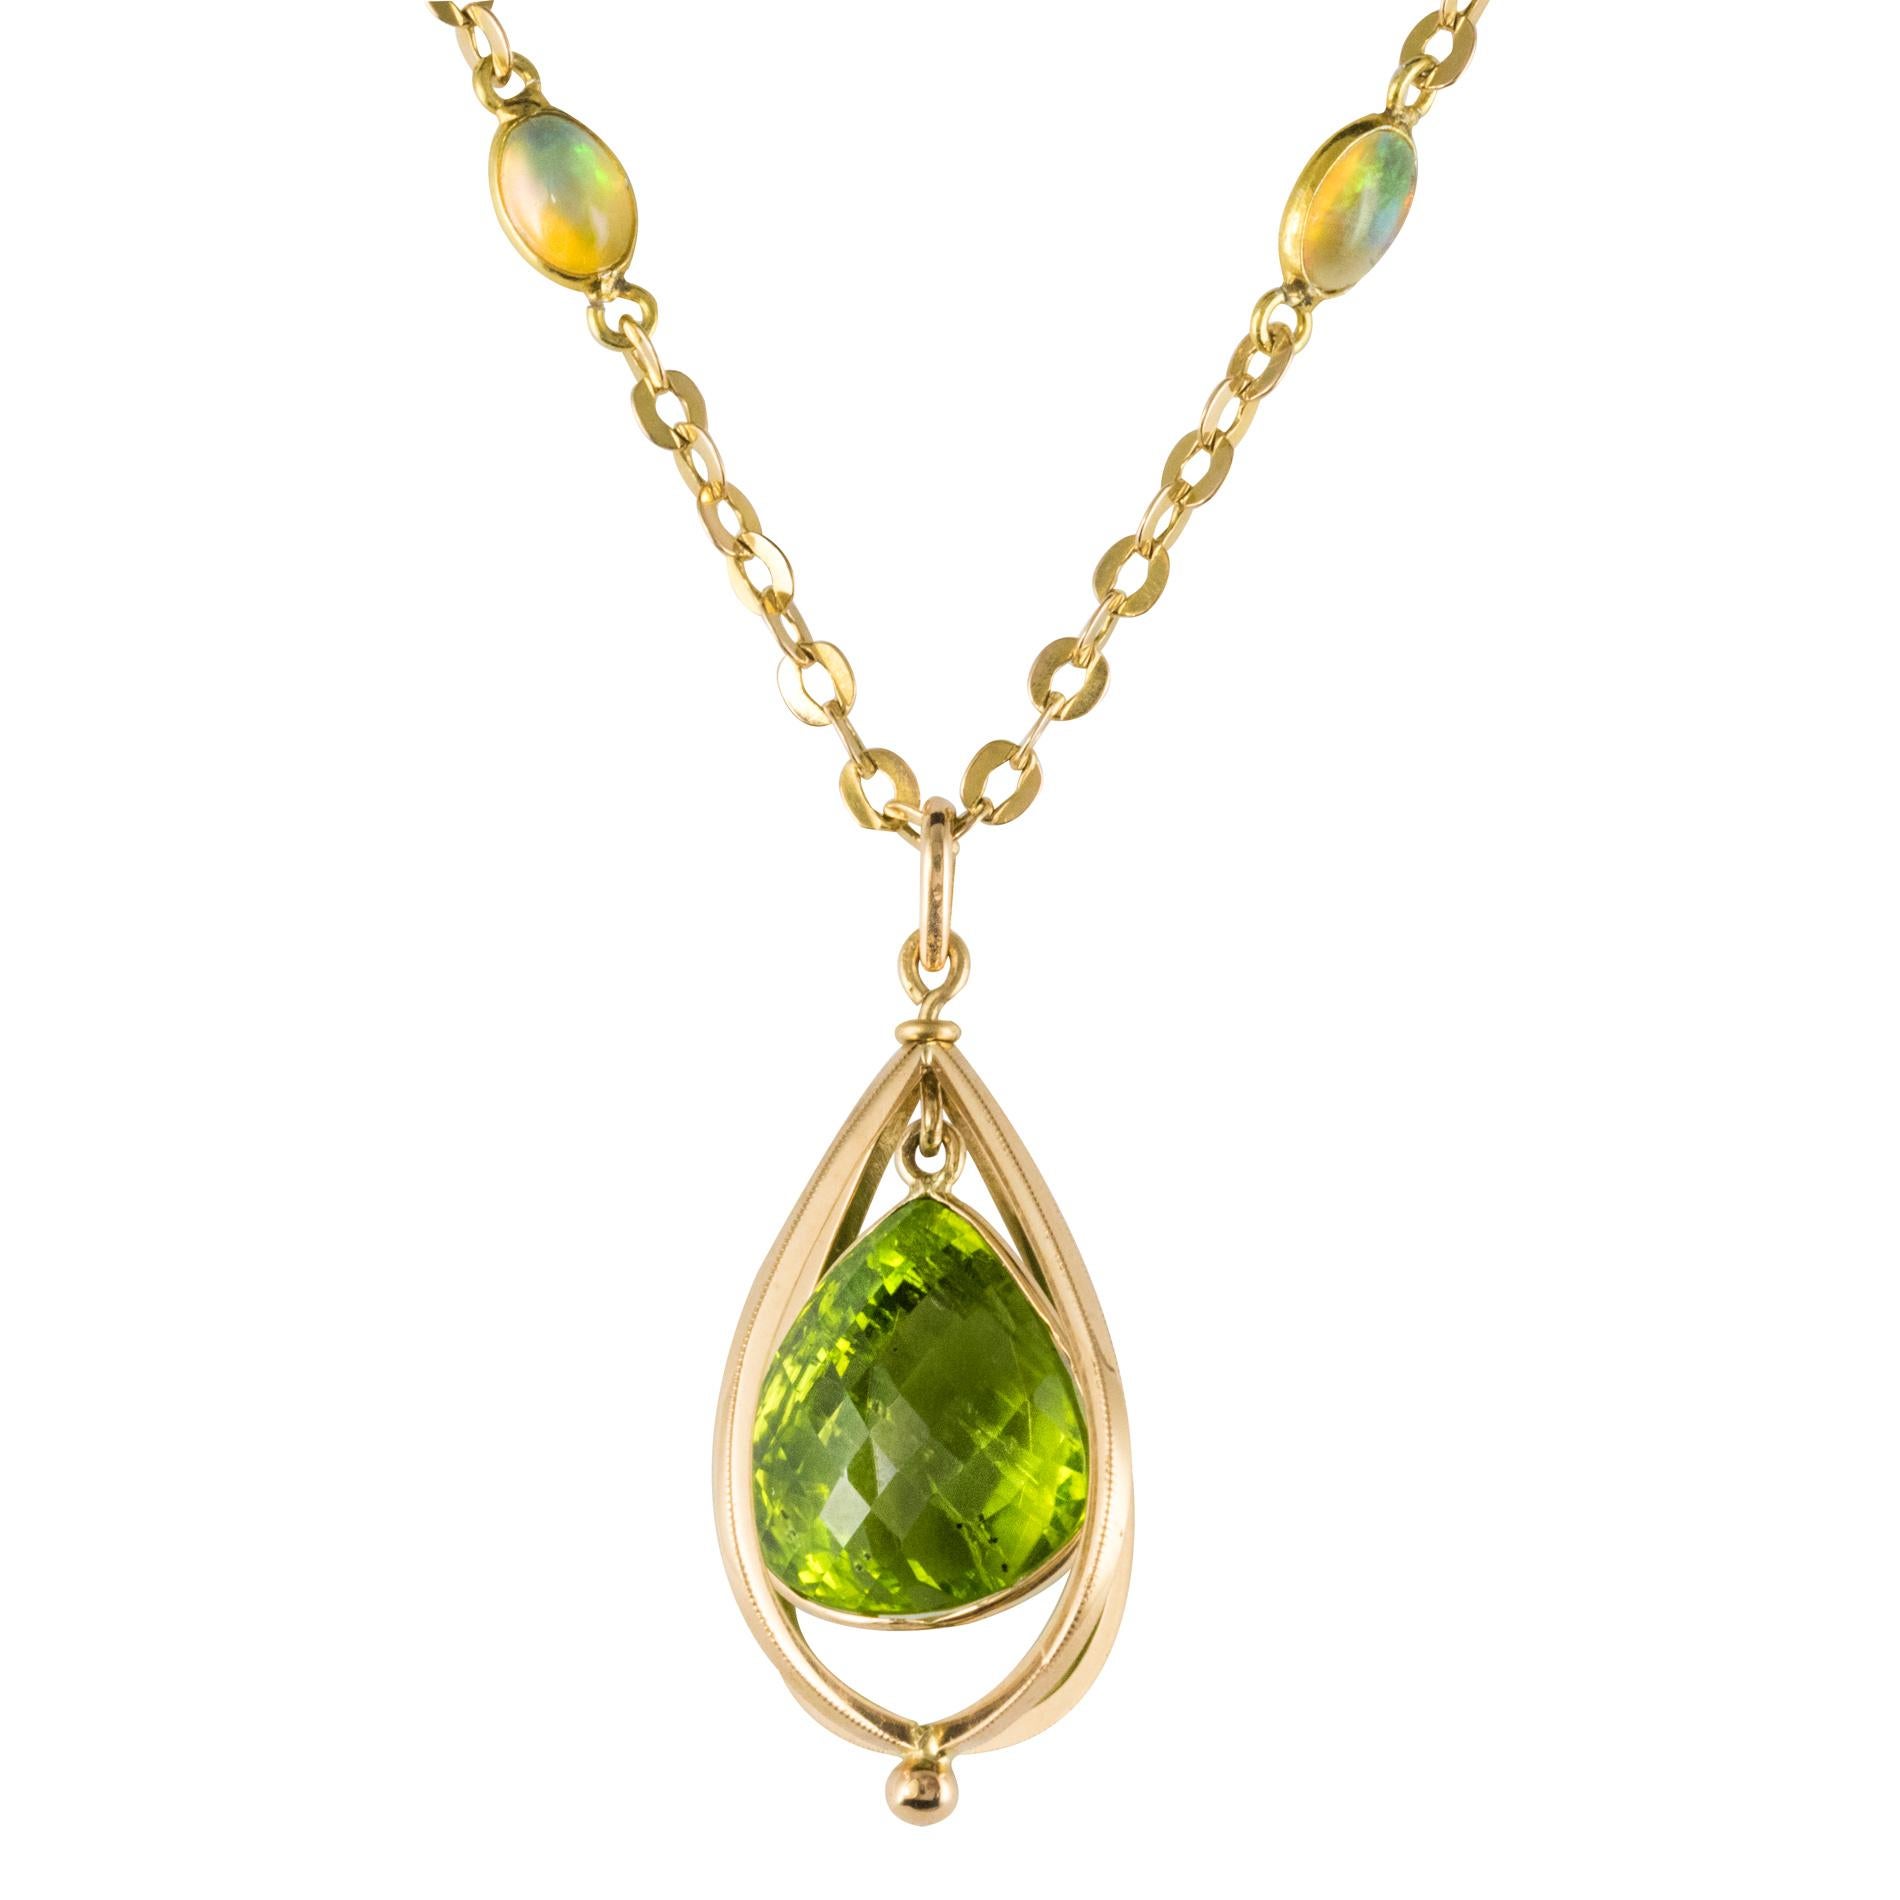 New 12, 1 Carats Peridot Pendant Chain Set with Opals Necklace